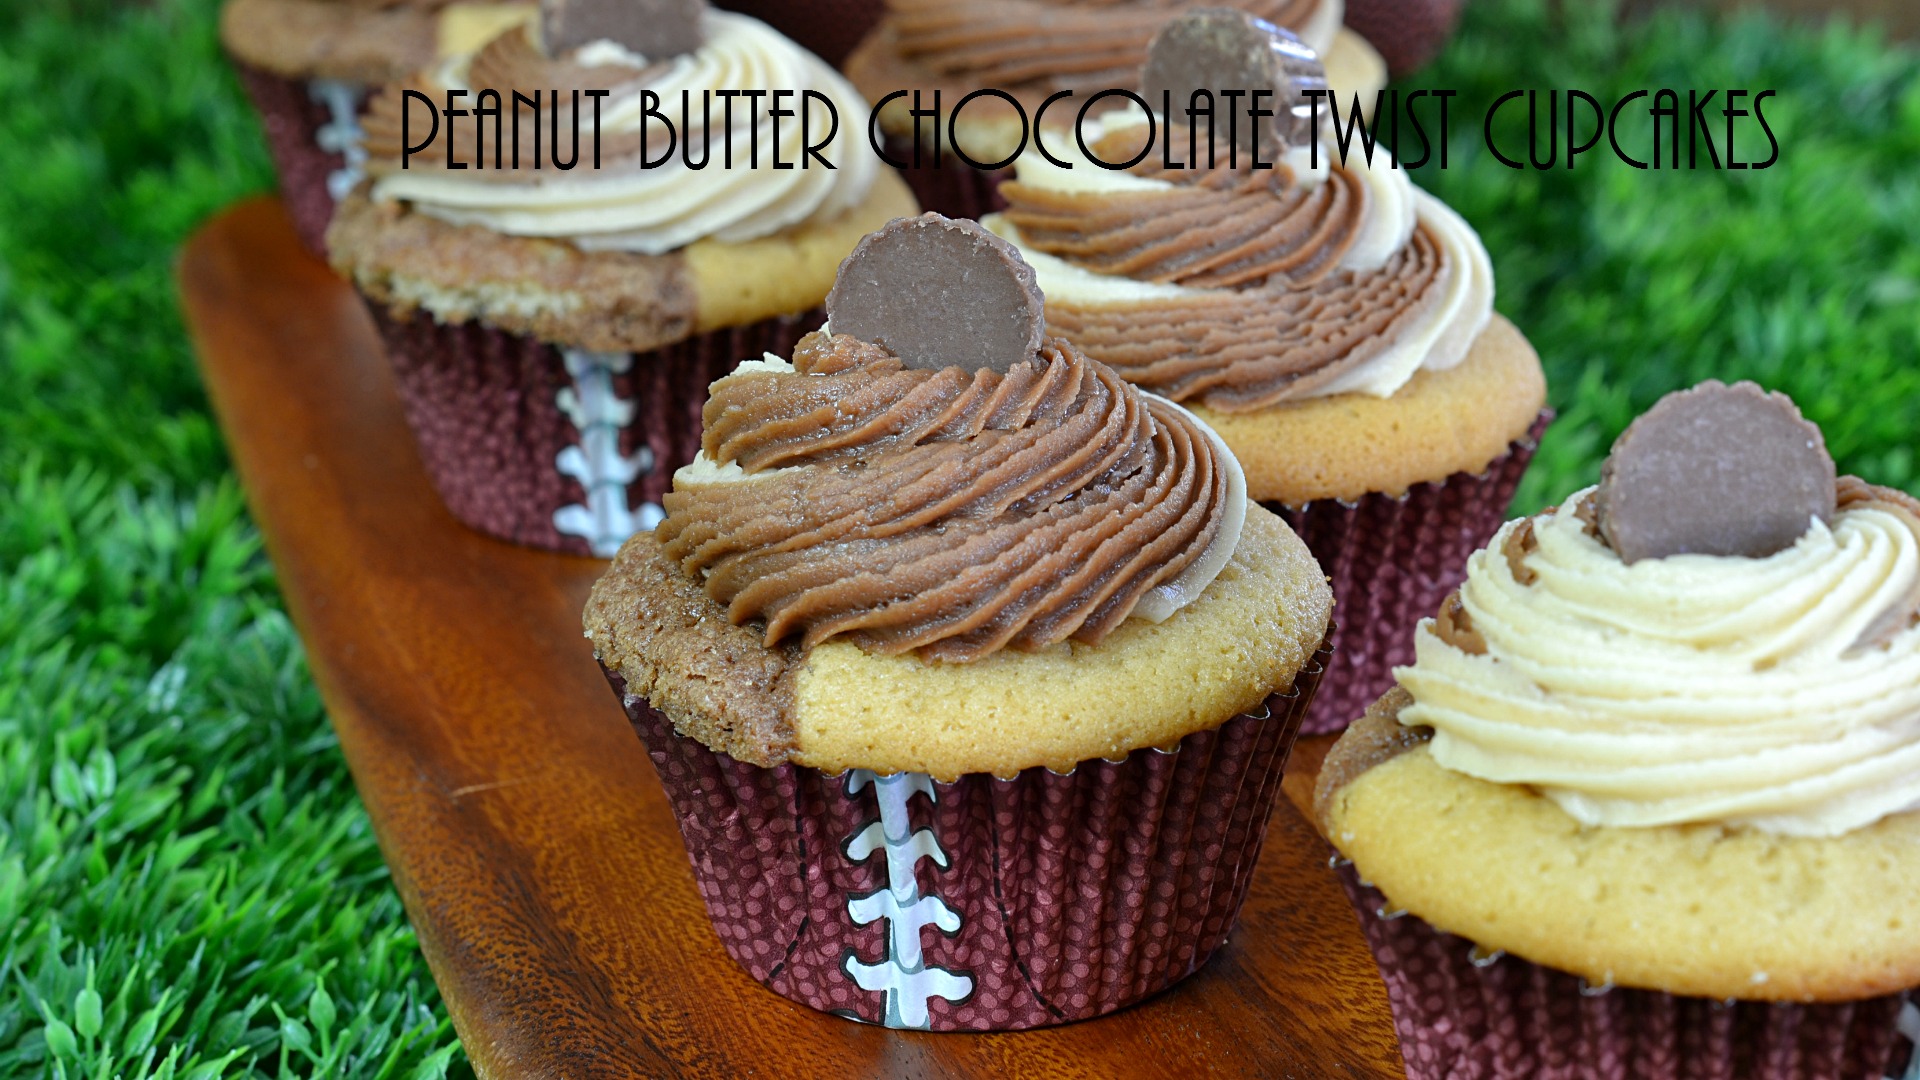 25 Game Day Desserts | It's Fall and that means one thing FOOTBALL! Enjoy this collection of desserts that are perfect for tailgating and football parties.